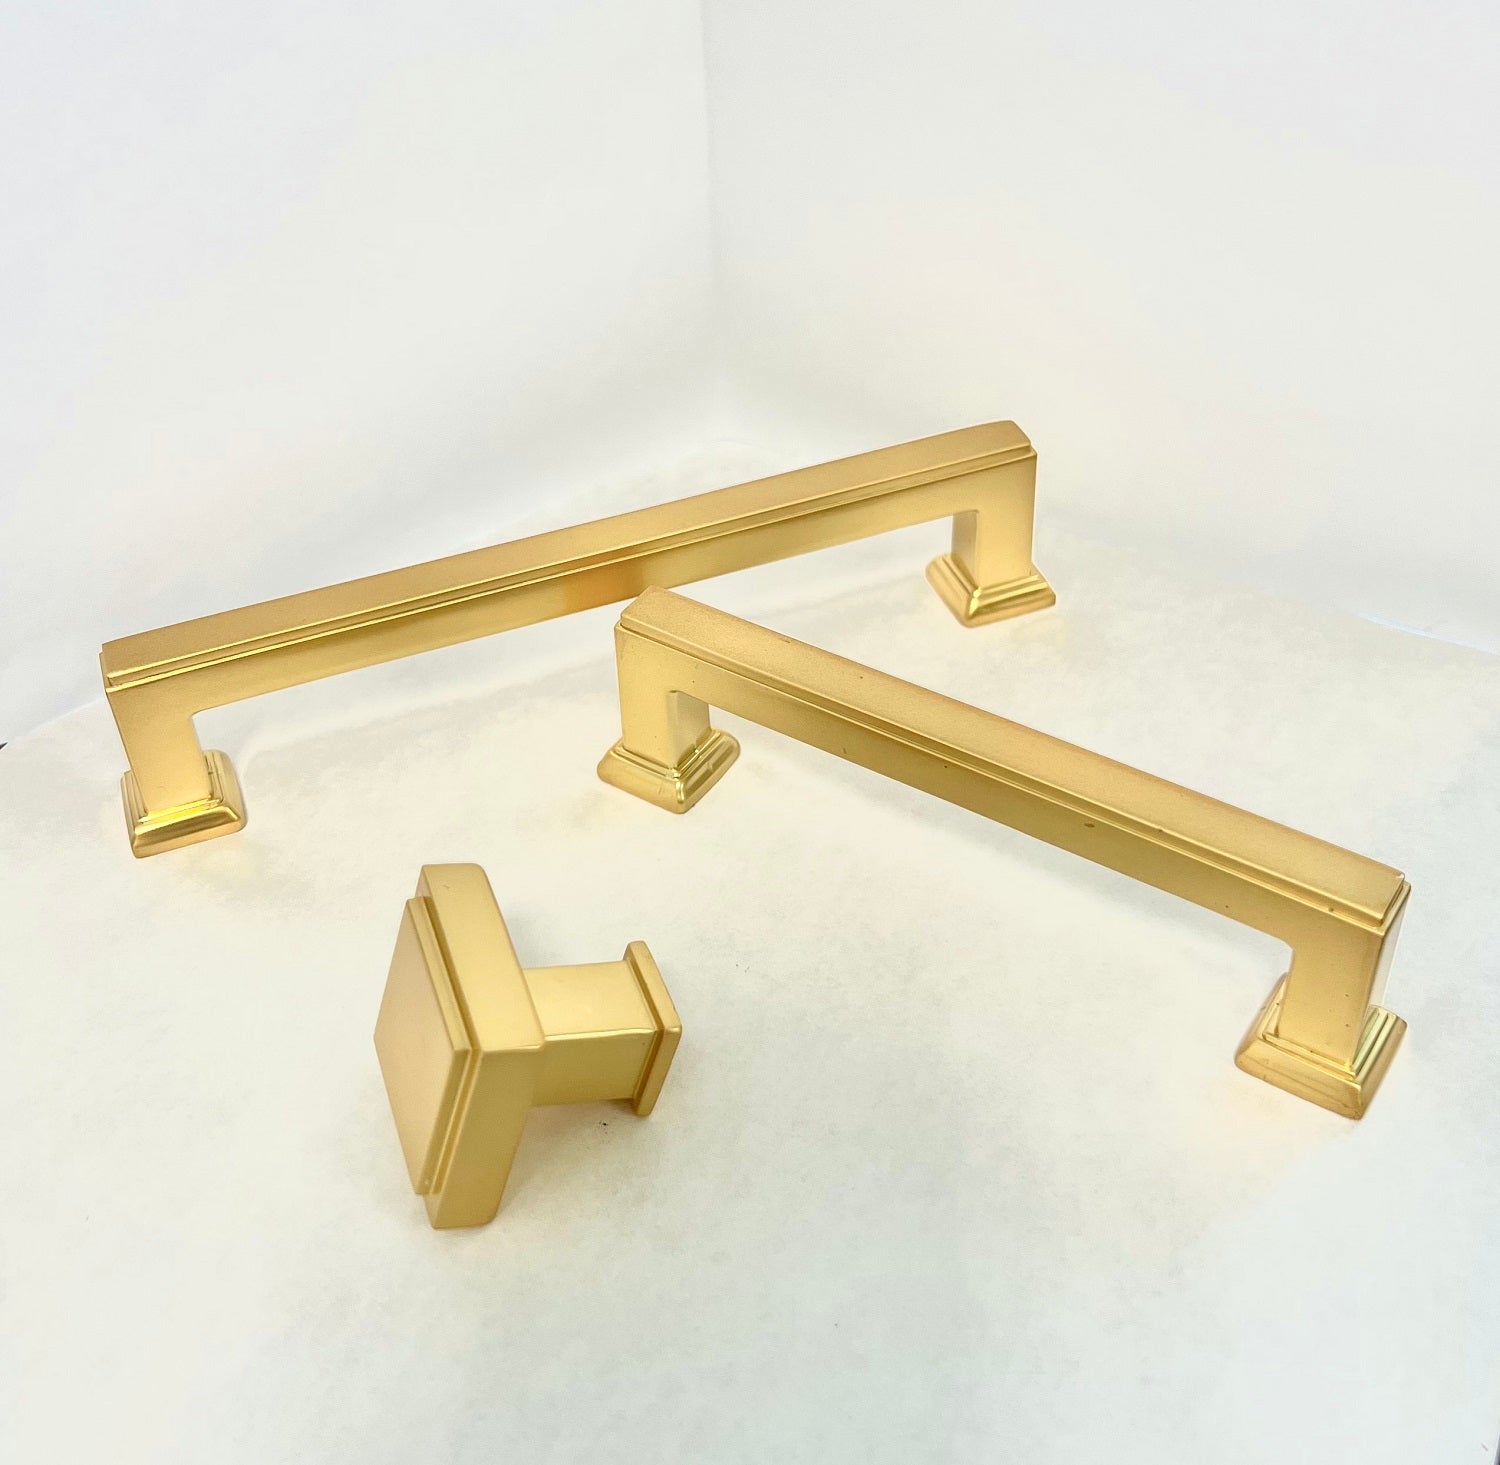 Not Your Grandma's Brass! Modern Brushed and Satin Brass Cabinet Hardware